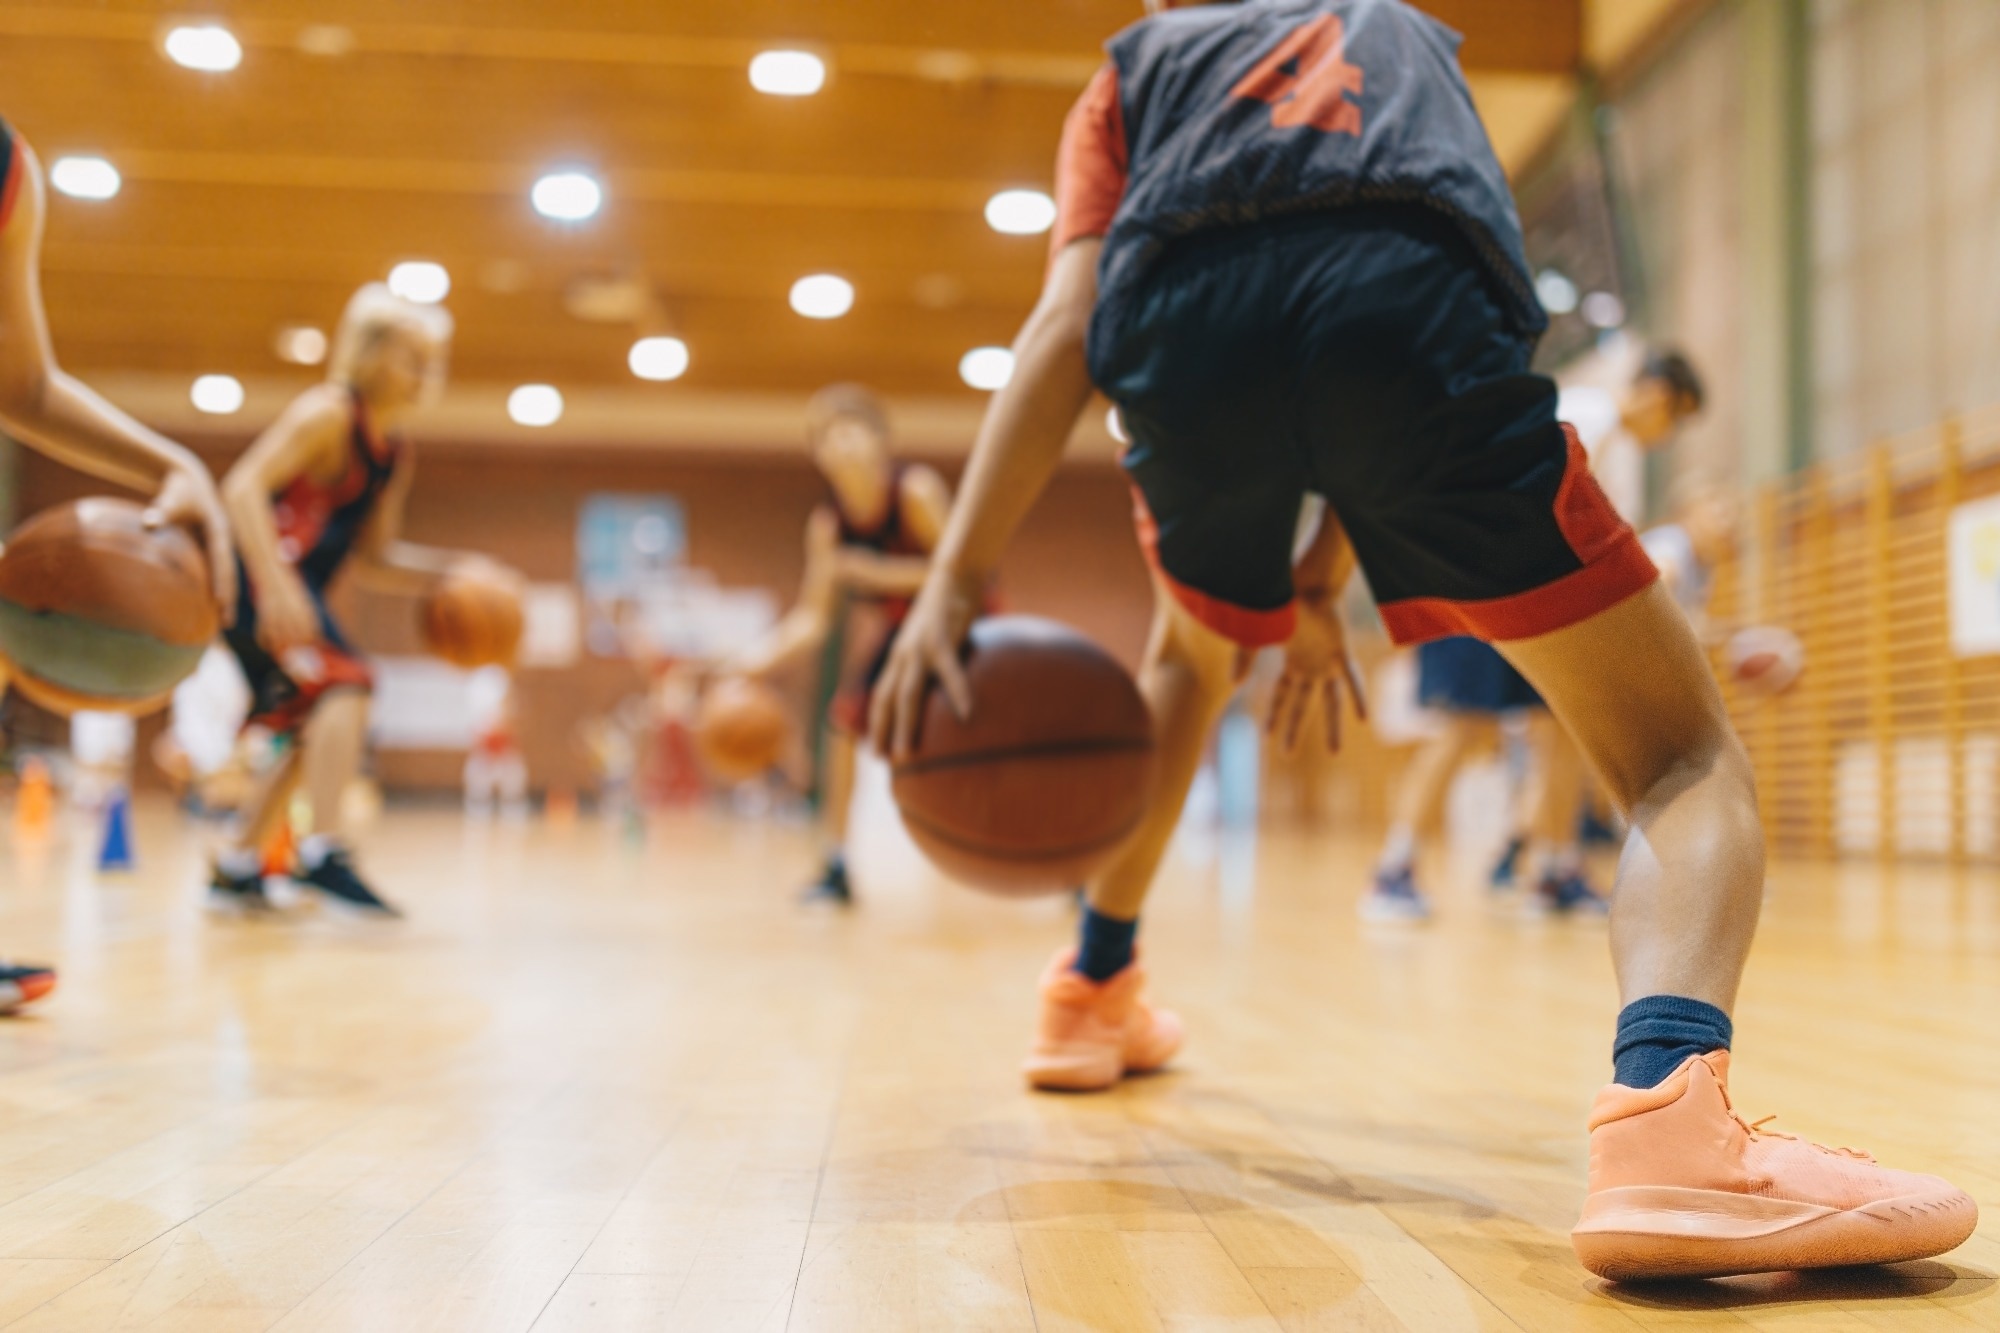 Study shows basketball playing sharpens manual dexterity in kids